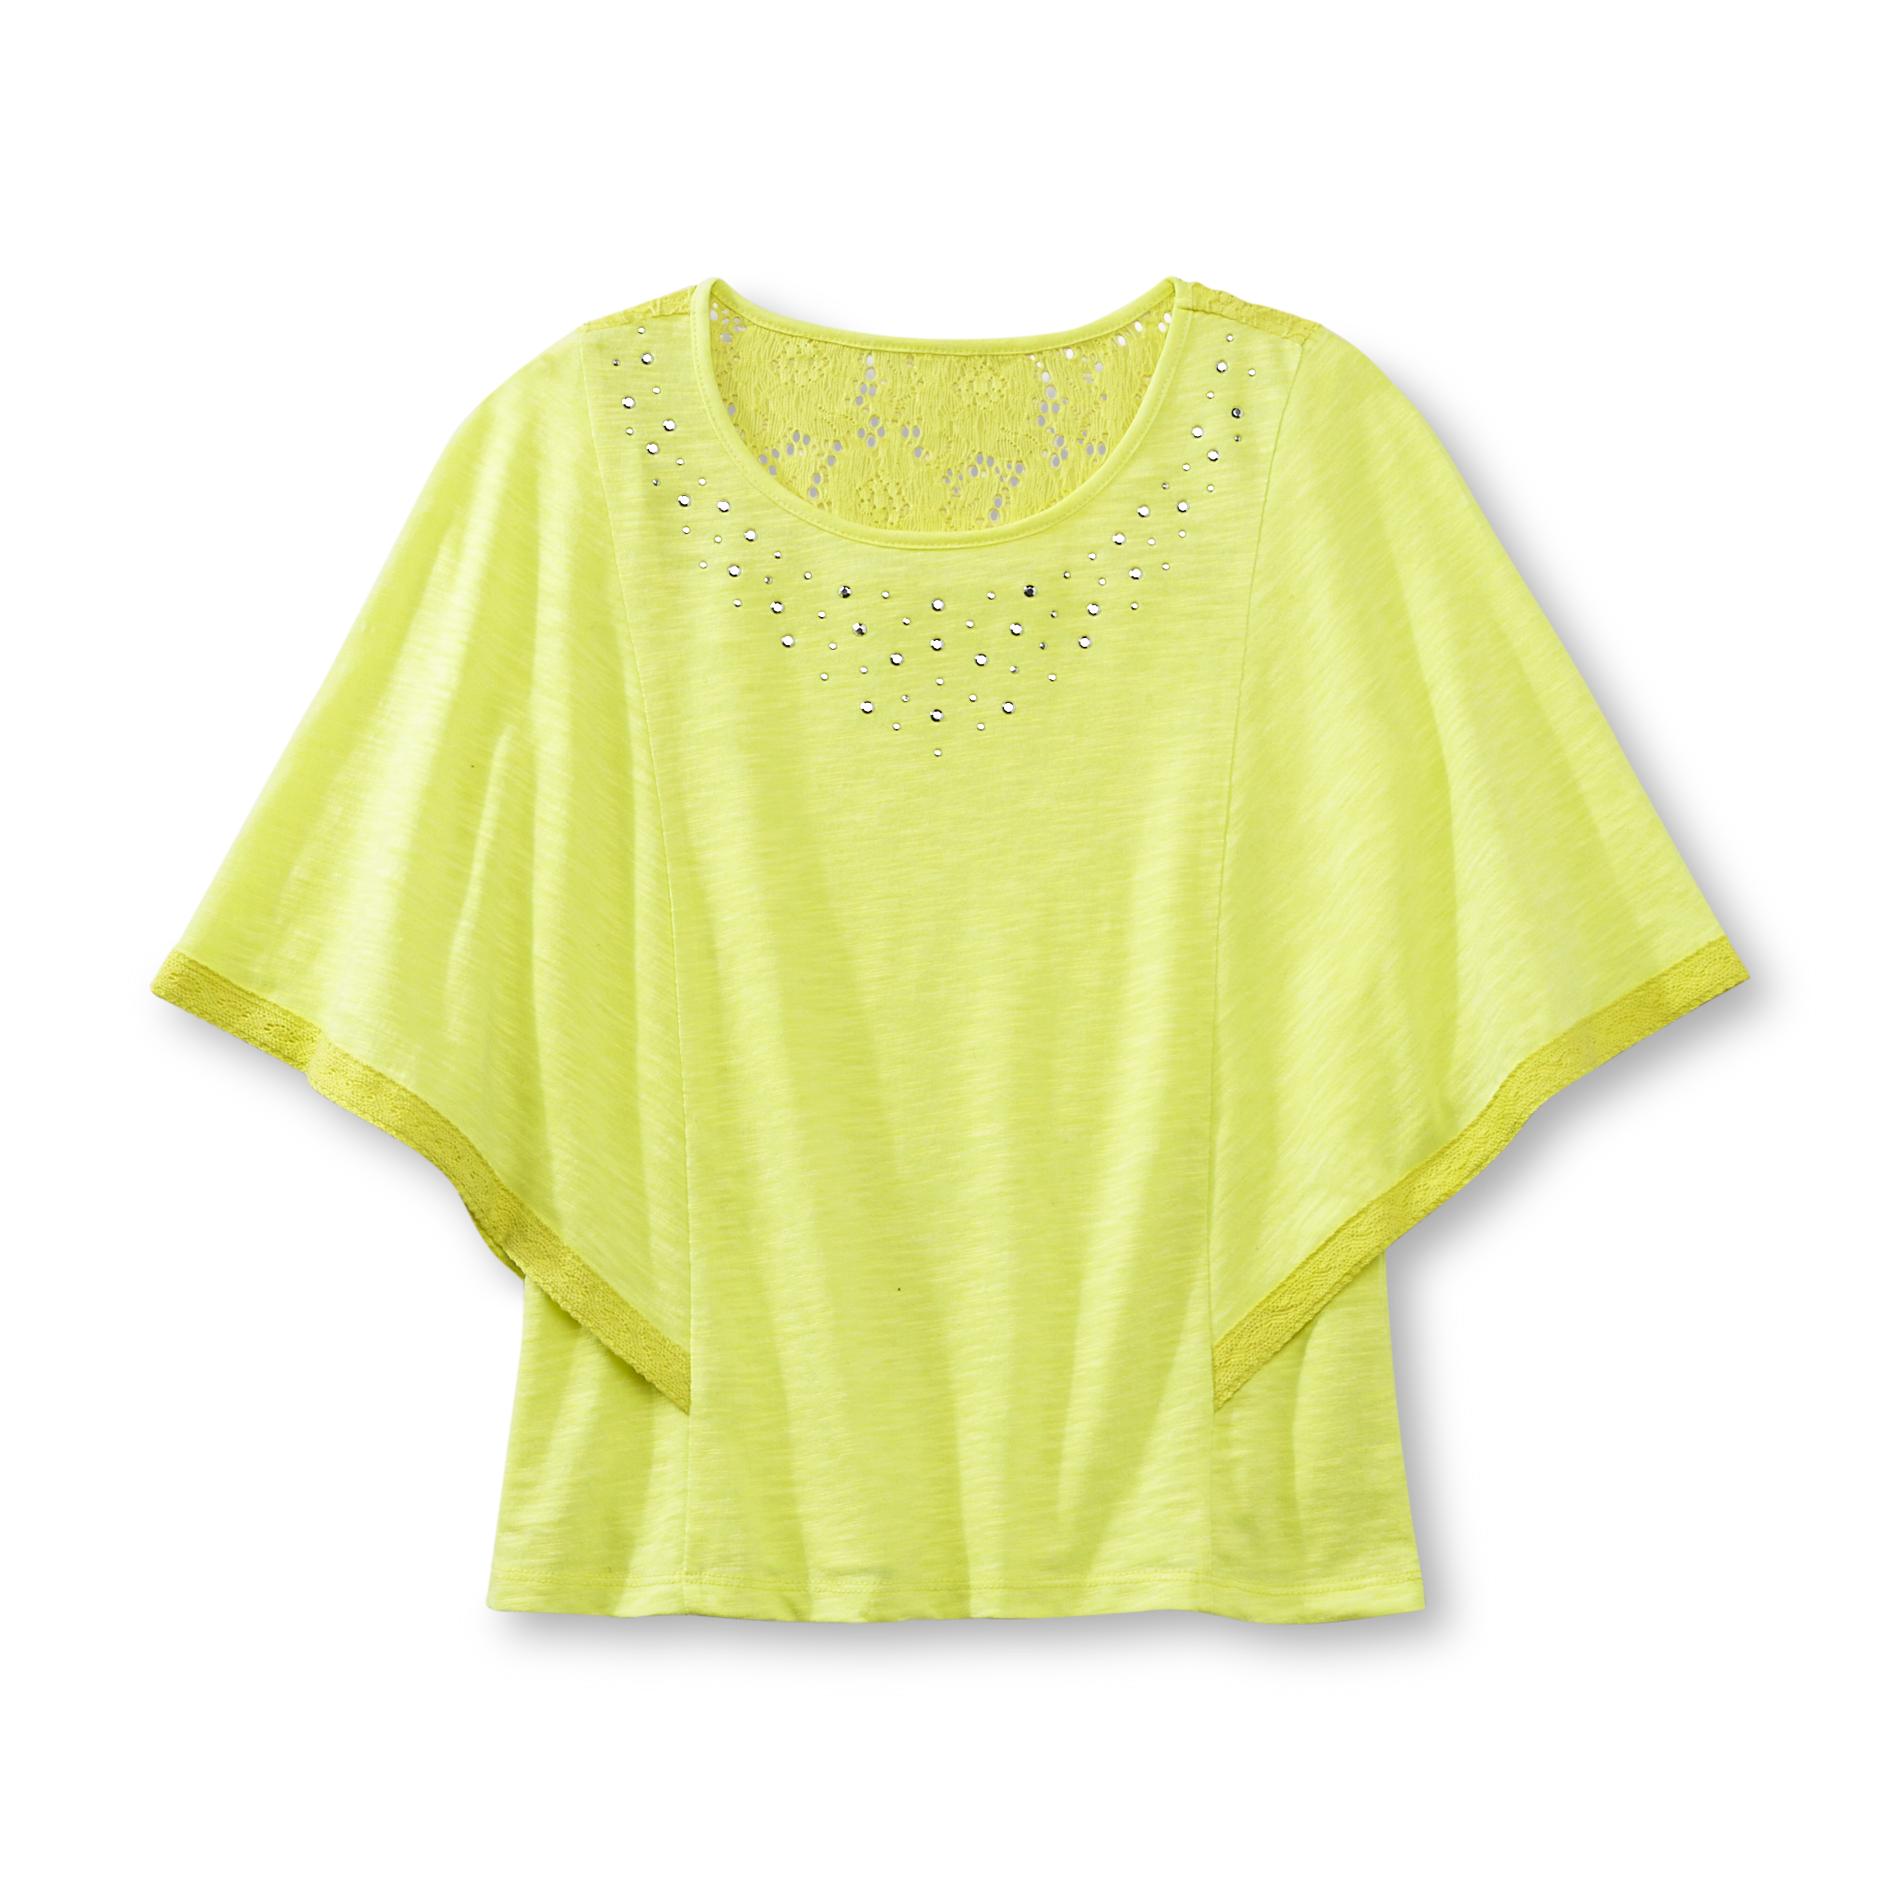 Route 66 Girl's Batwing Sleeve Top - Studs & Lace